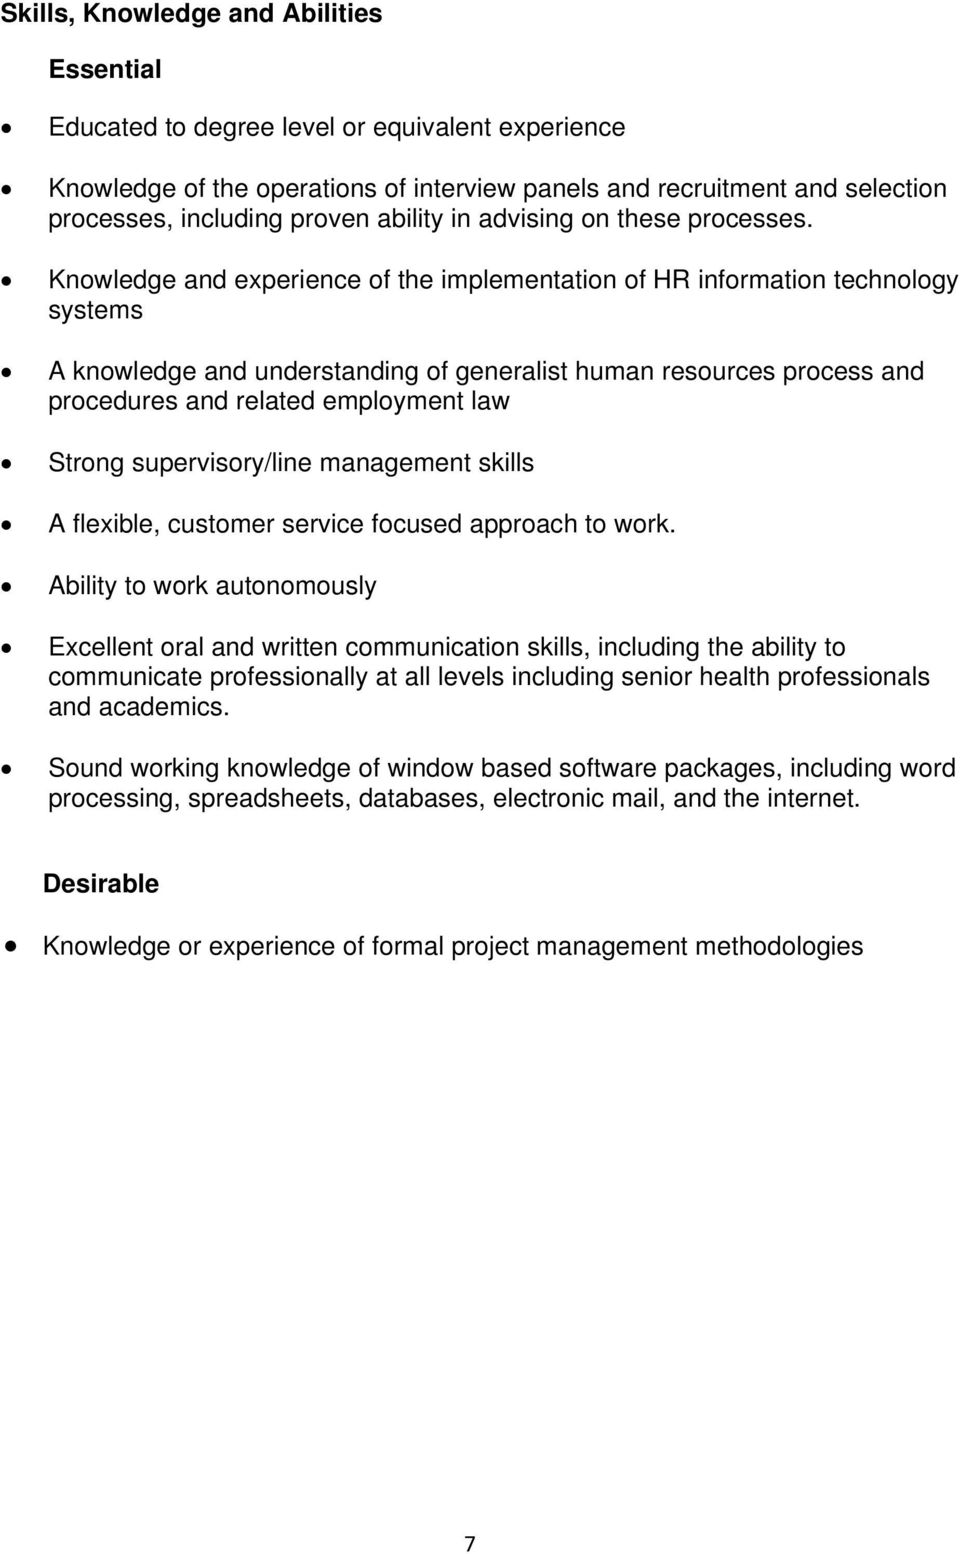 Knowledge and experience of the implementation of HR information technology systems A knowledge and understanding of generalist human resources process and procedures and related employment law